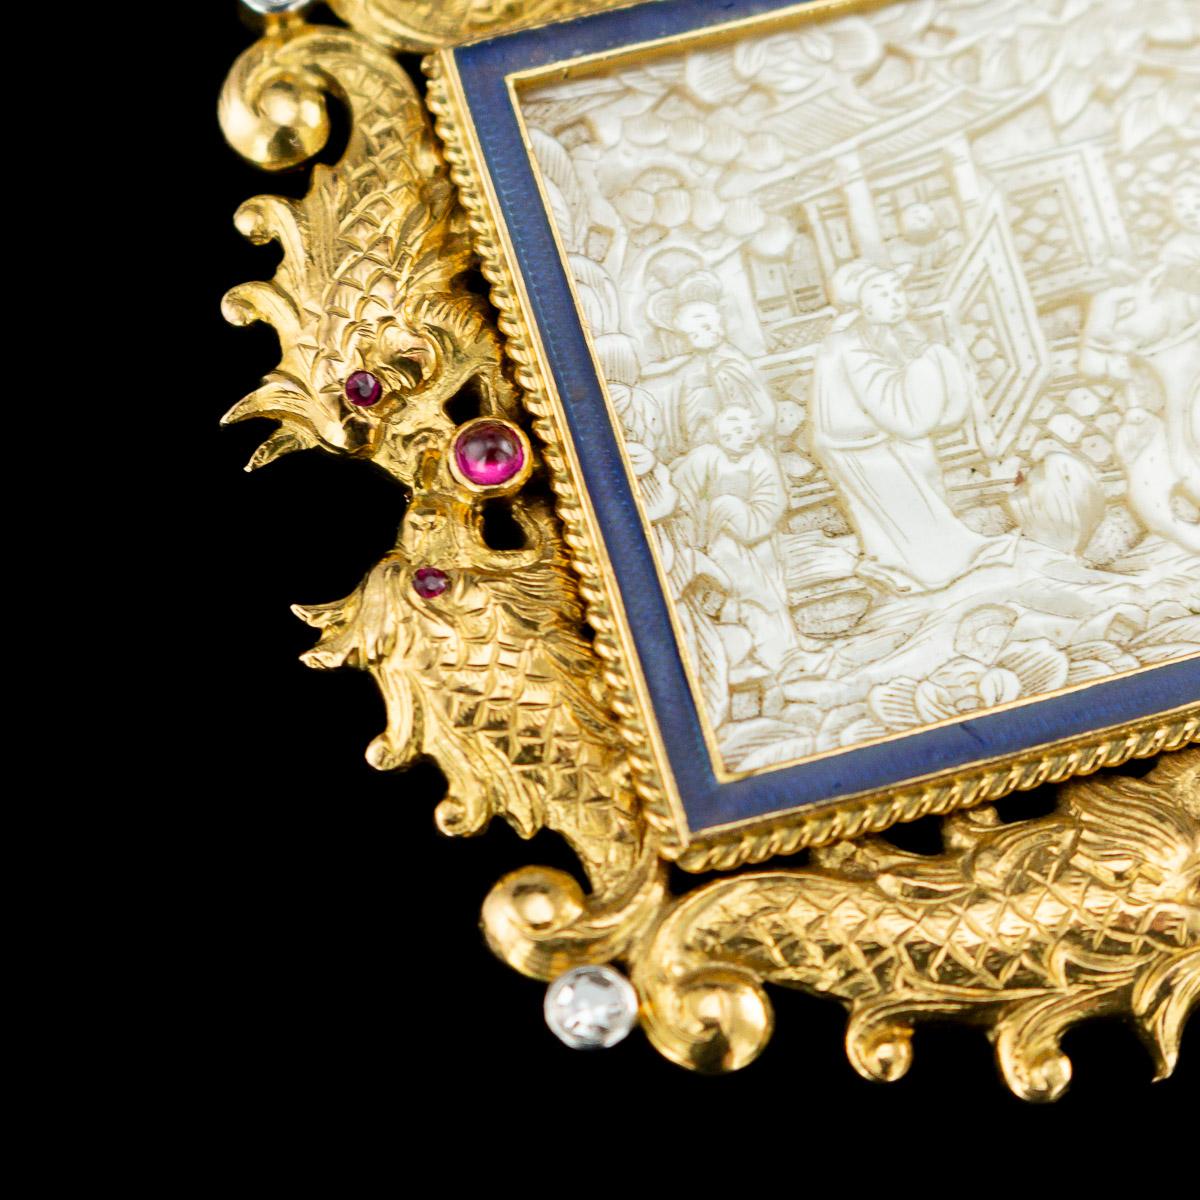 19th Century Antique French Chinoiserie 18 Karat Gold, Gem-Set and Enamel Brooch, circa 1890